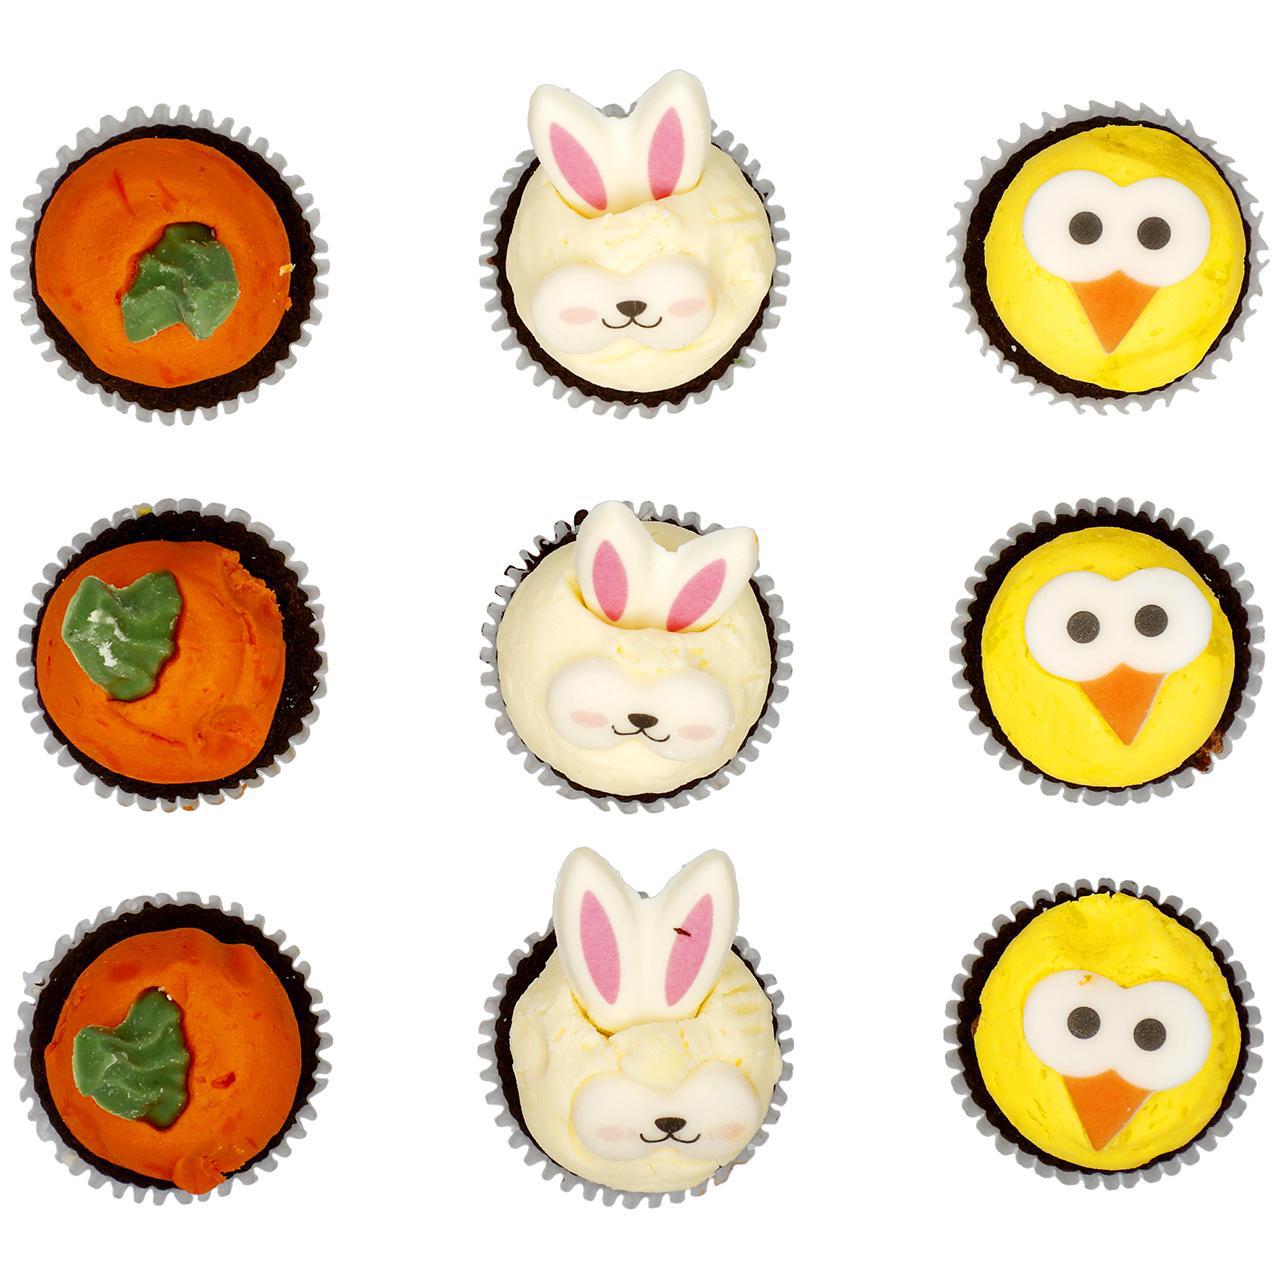 M&S 9 Easter Cupcakes 220g